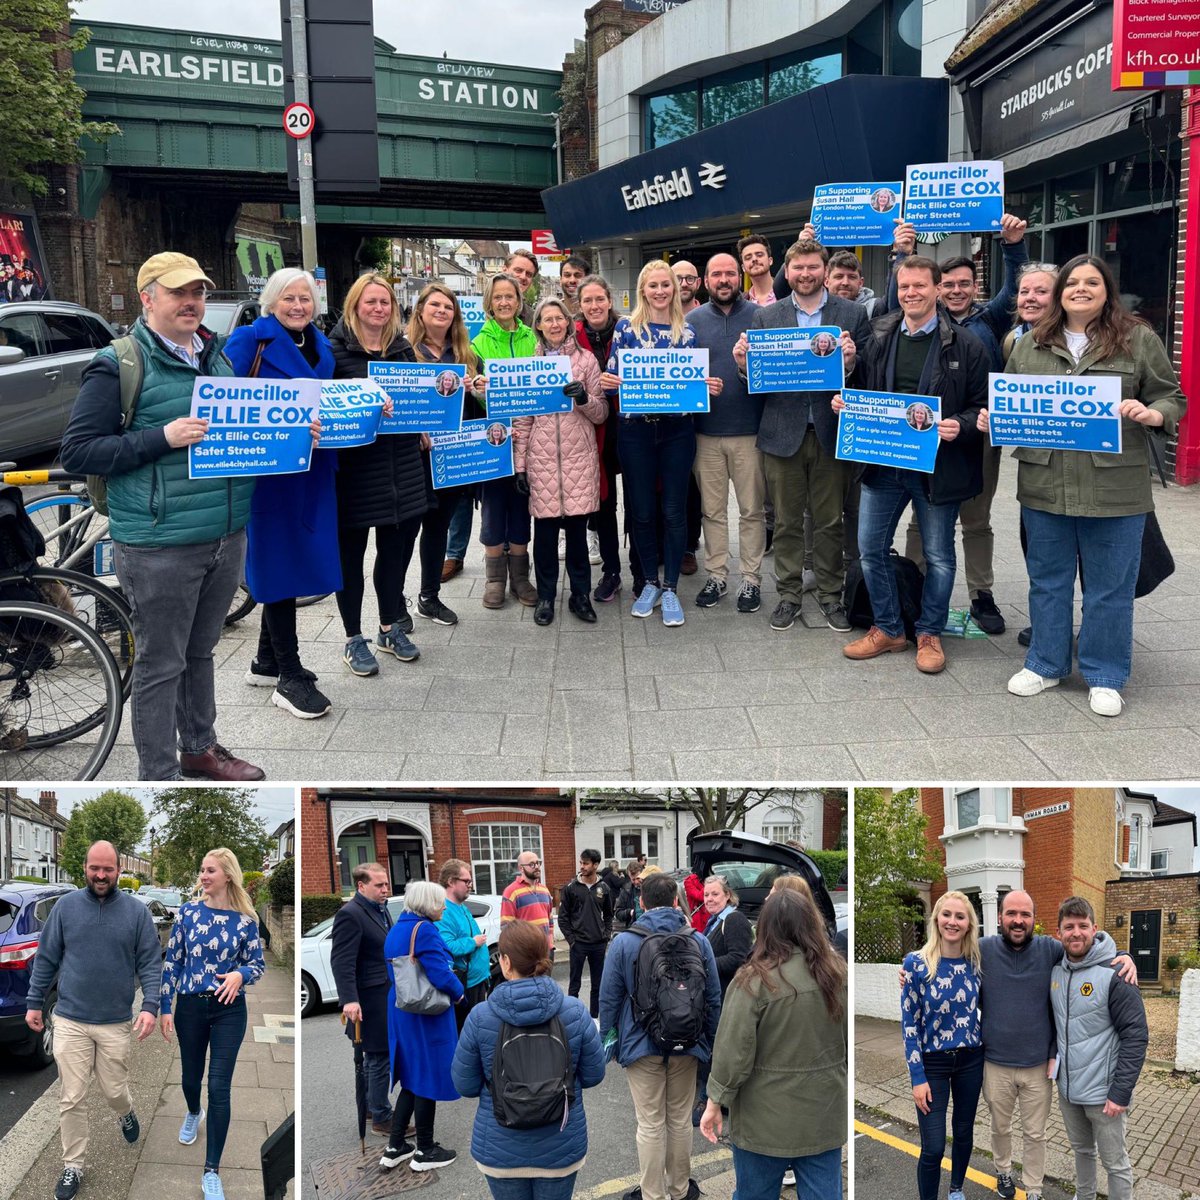 Top @wandsworth team out in #Earlsfield #Tooting #Merton & #Wandsworth Getting out the vote for @Councillorsuzie, @CllrCoxEleanor & @Conservatives on the GLA! Top team! #VoteConservative on May 2nd!